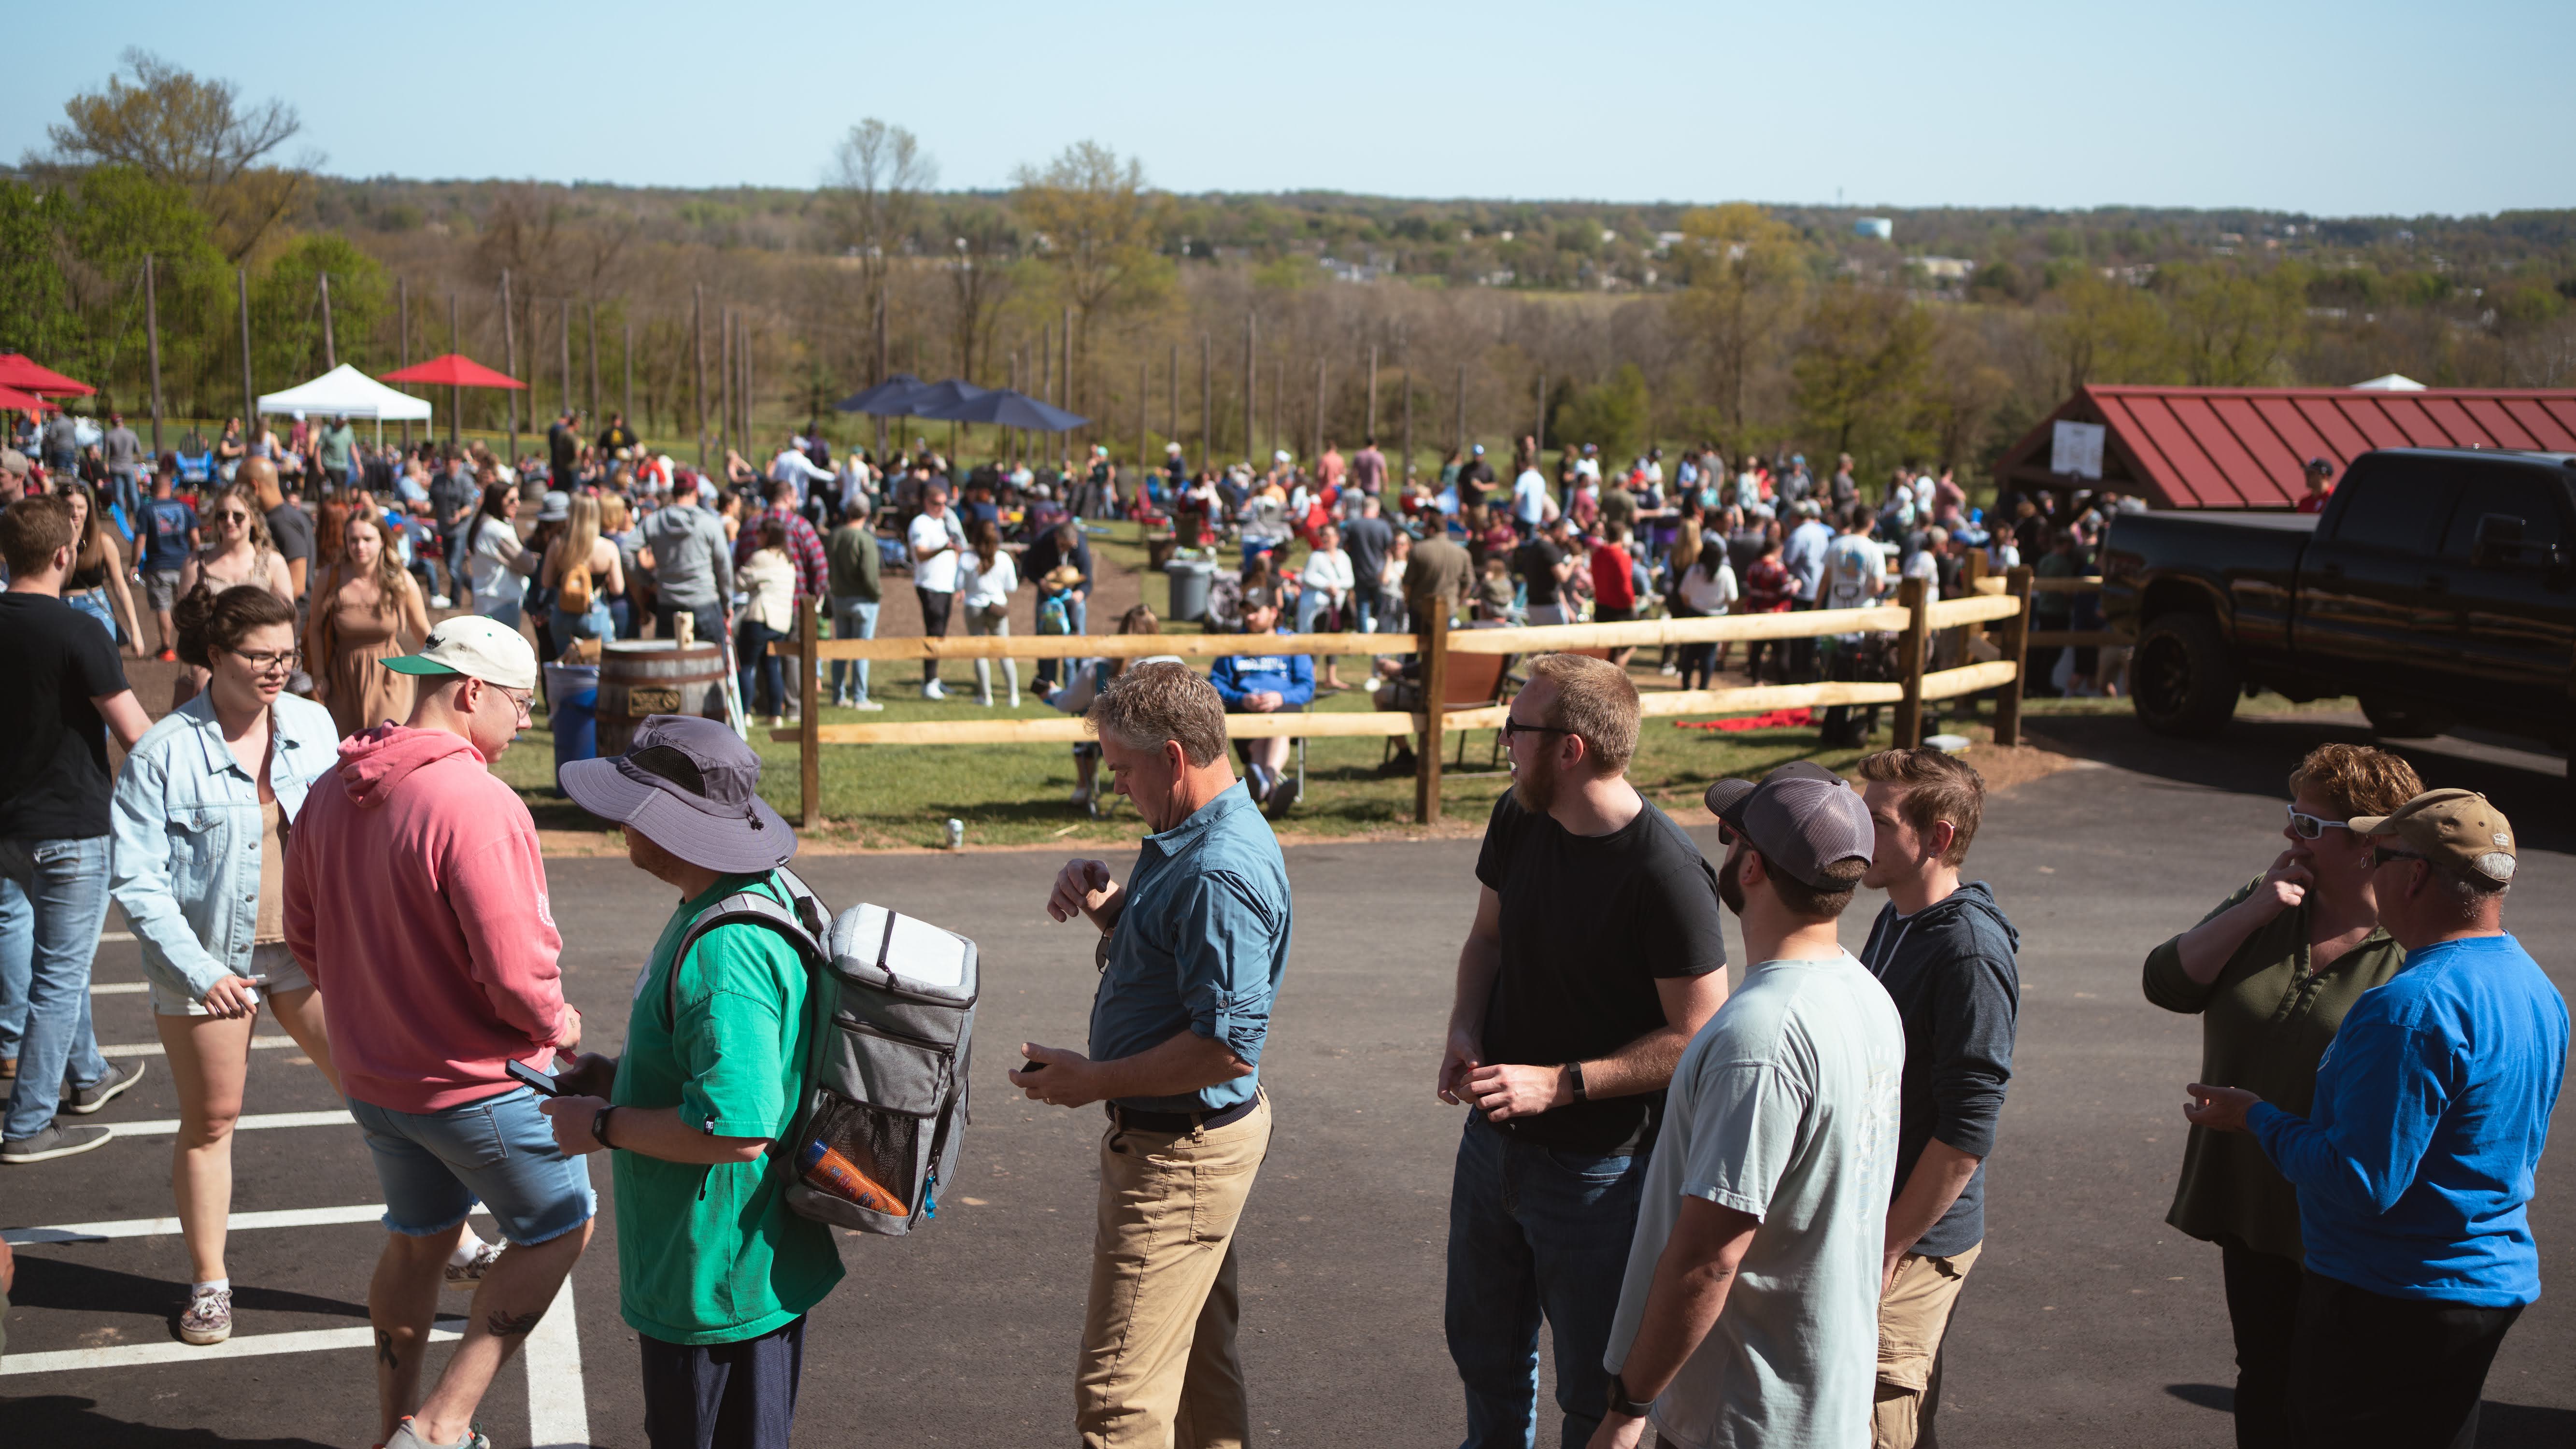 Find your favorite breweries in one spot at these Bucks County beer festivals